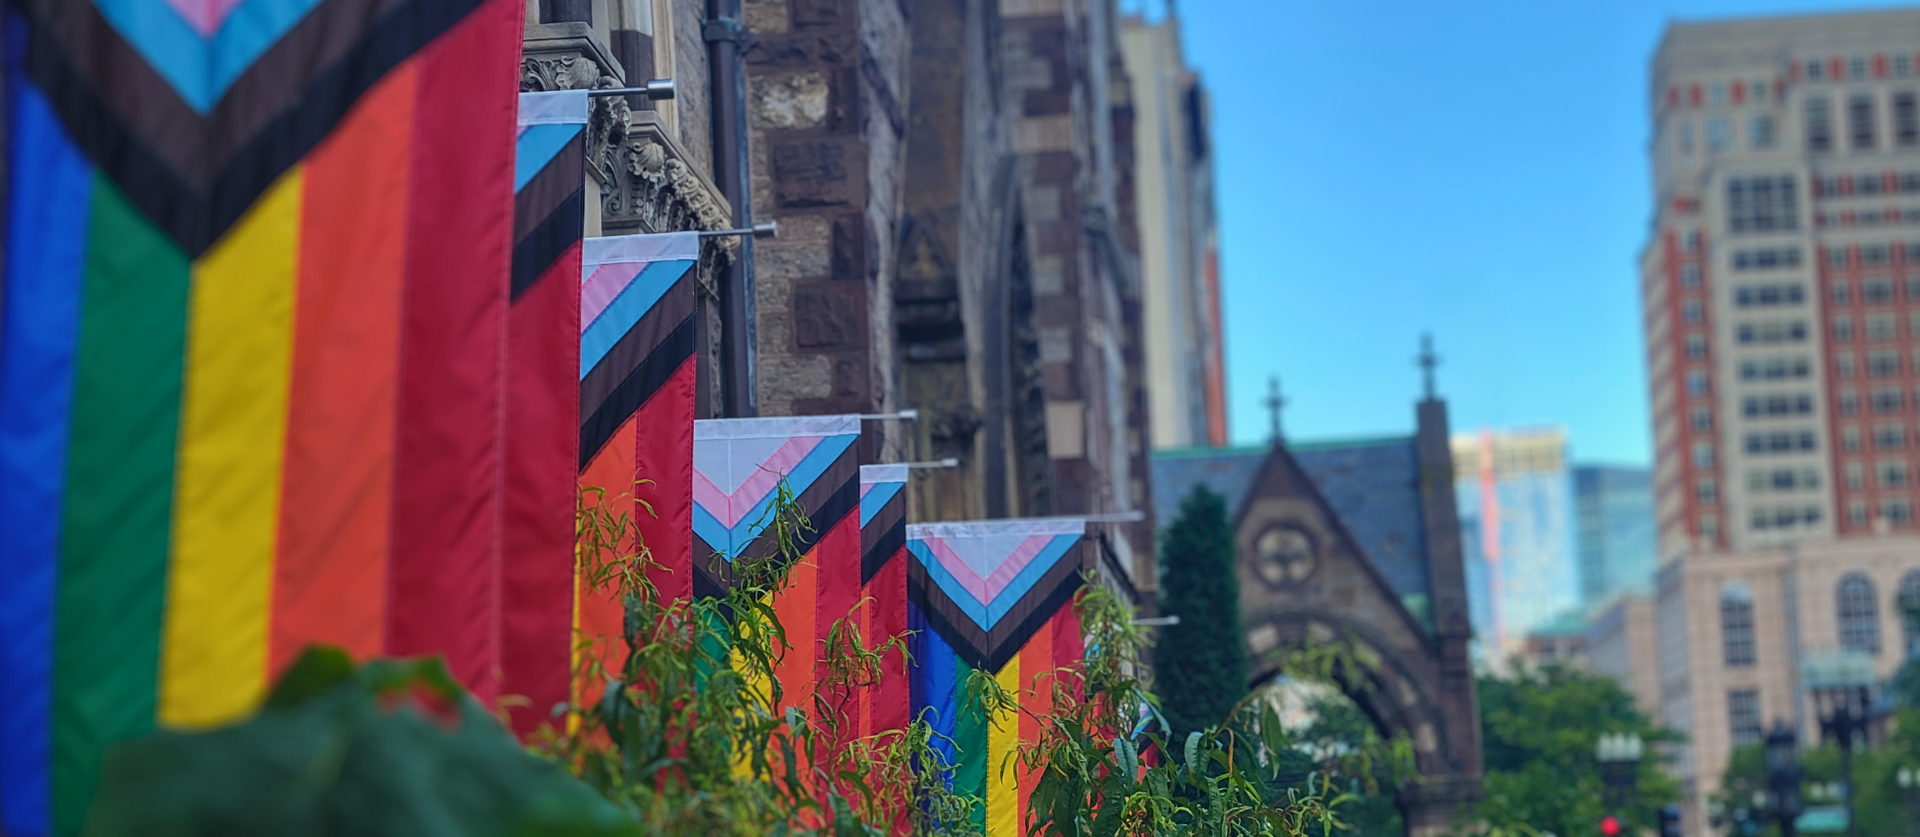 Progress pride flags outside of Old South Church in Boston